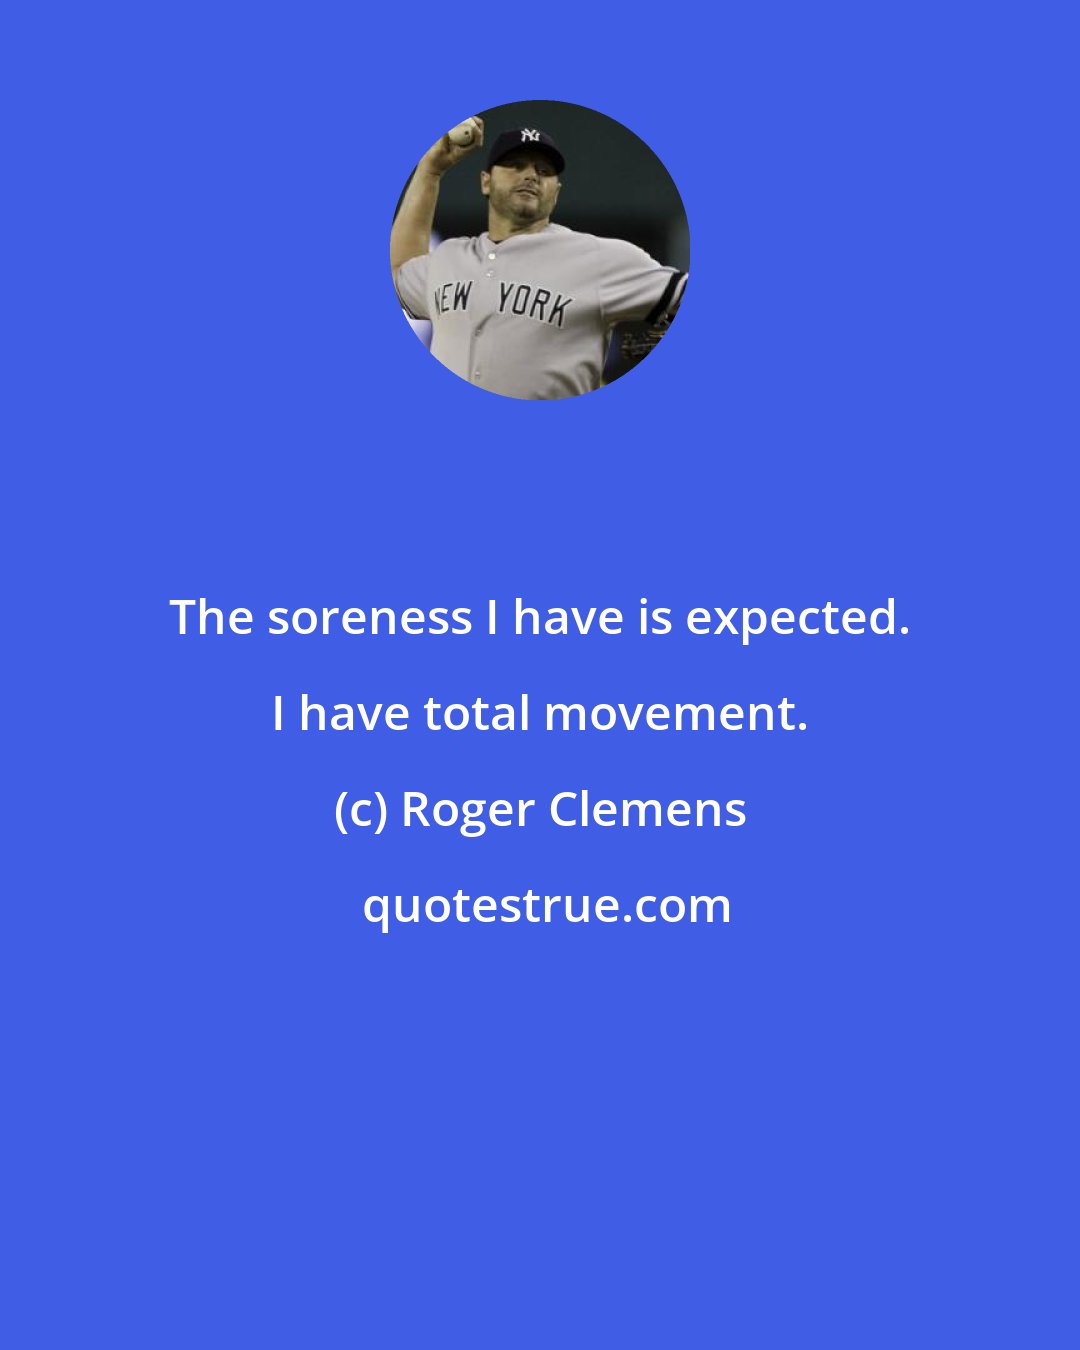 Roger Clemens: The soreness I have is expected. I have total movement.